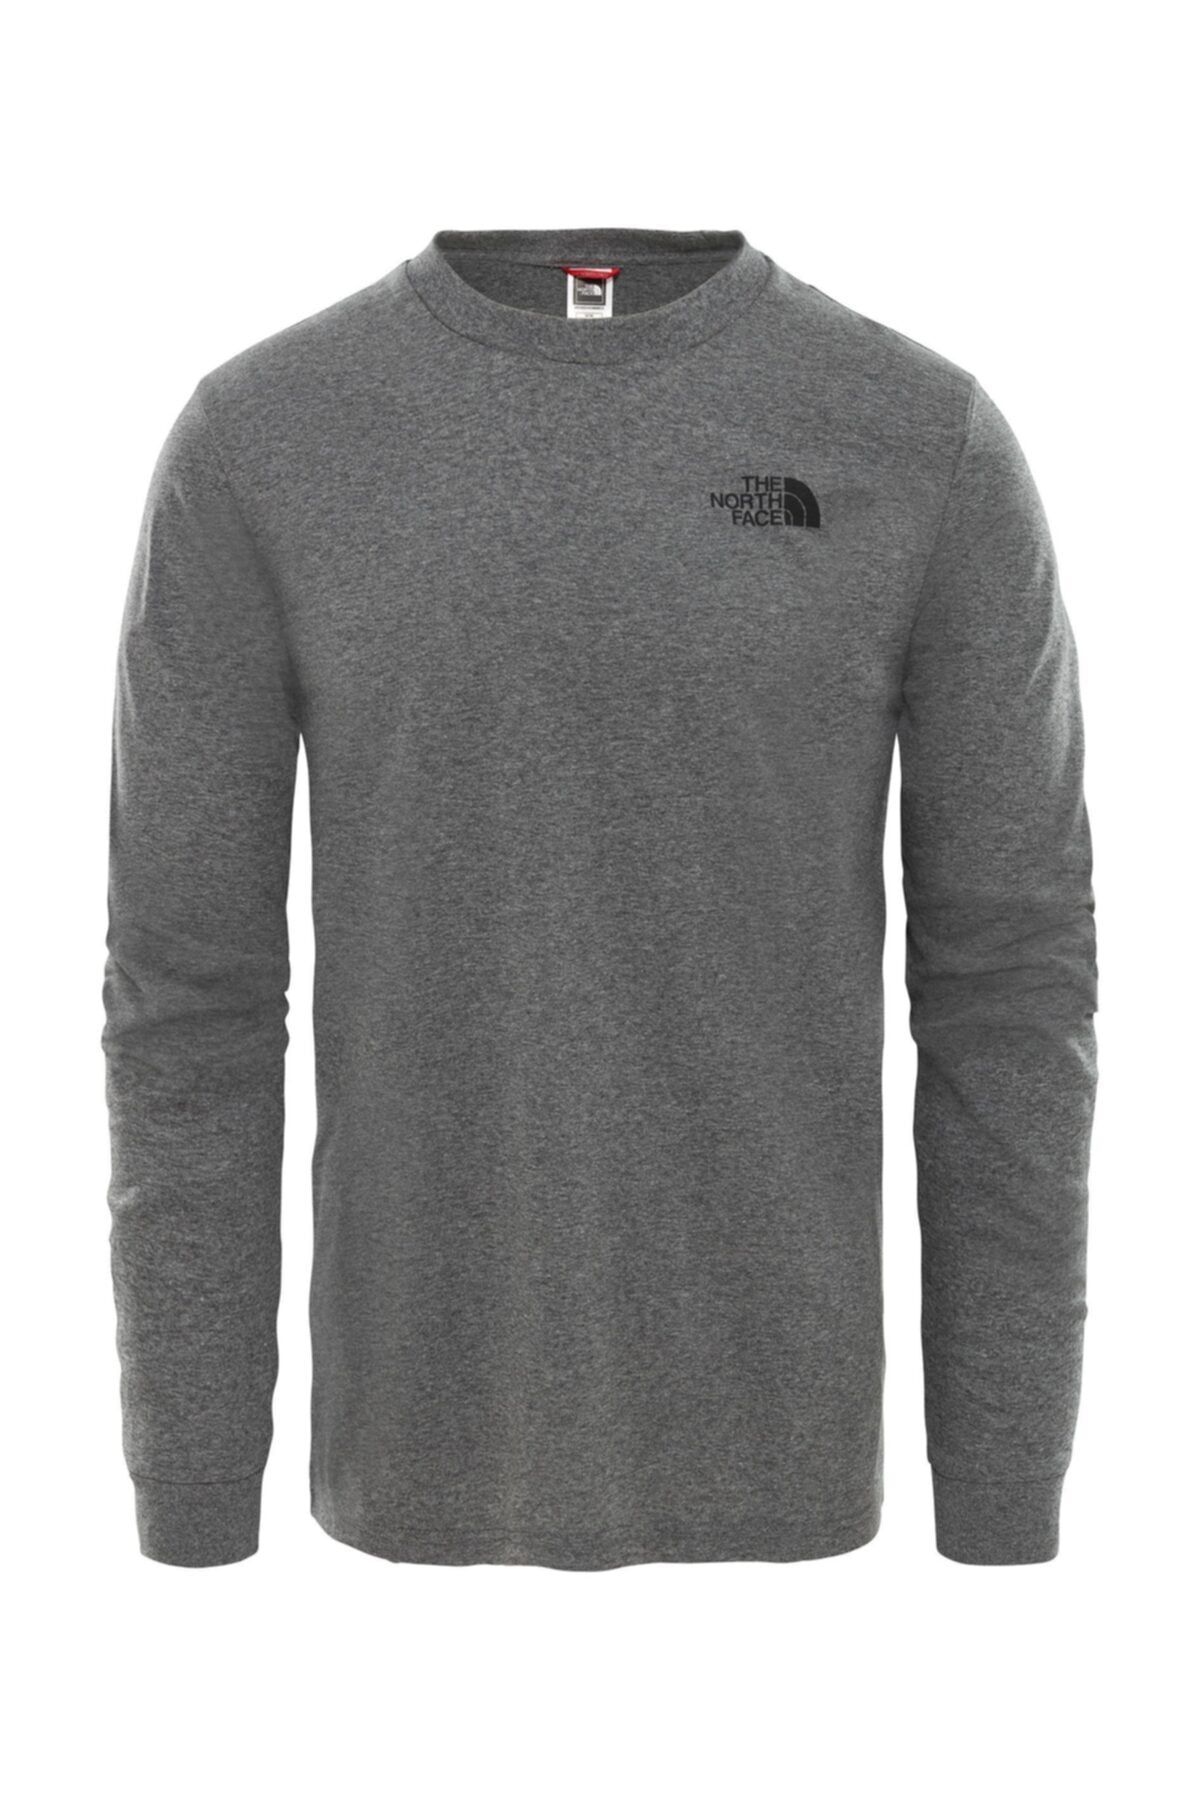 The North Face The Northface Erkek Ls Sımple Dome Tee Nf0a3l3bdyy1